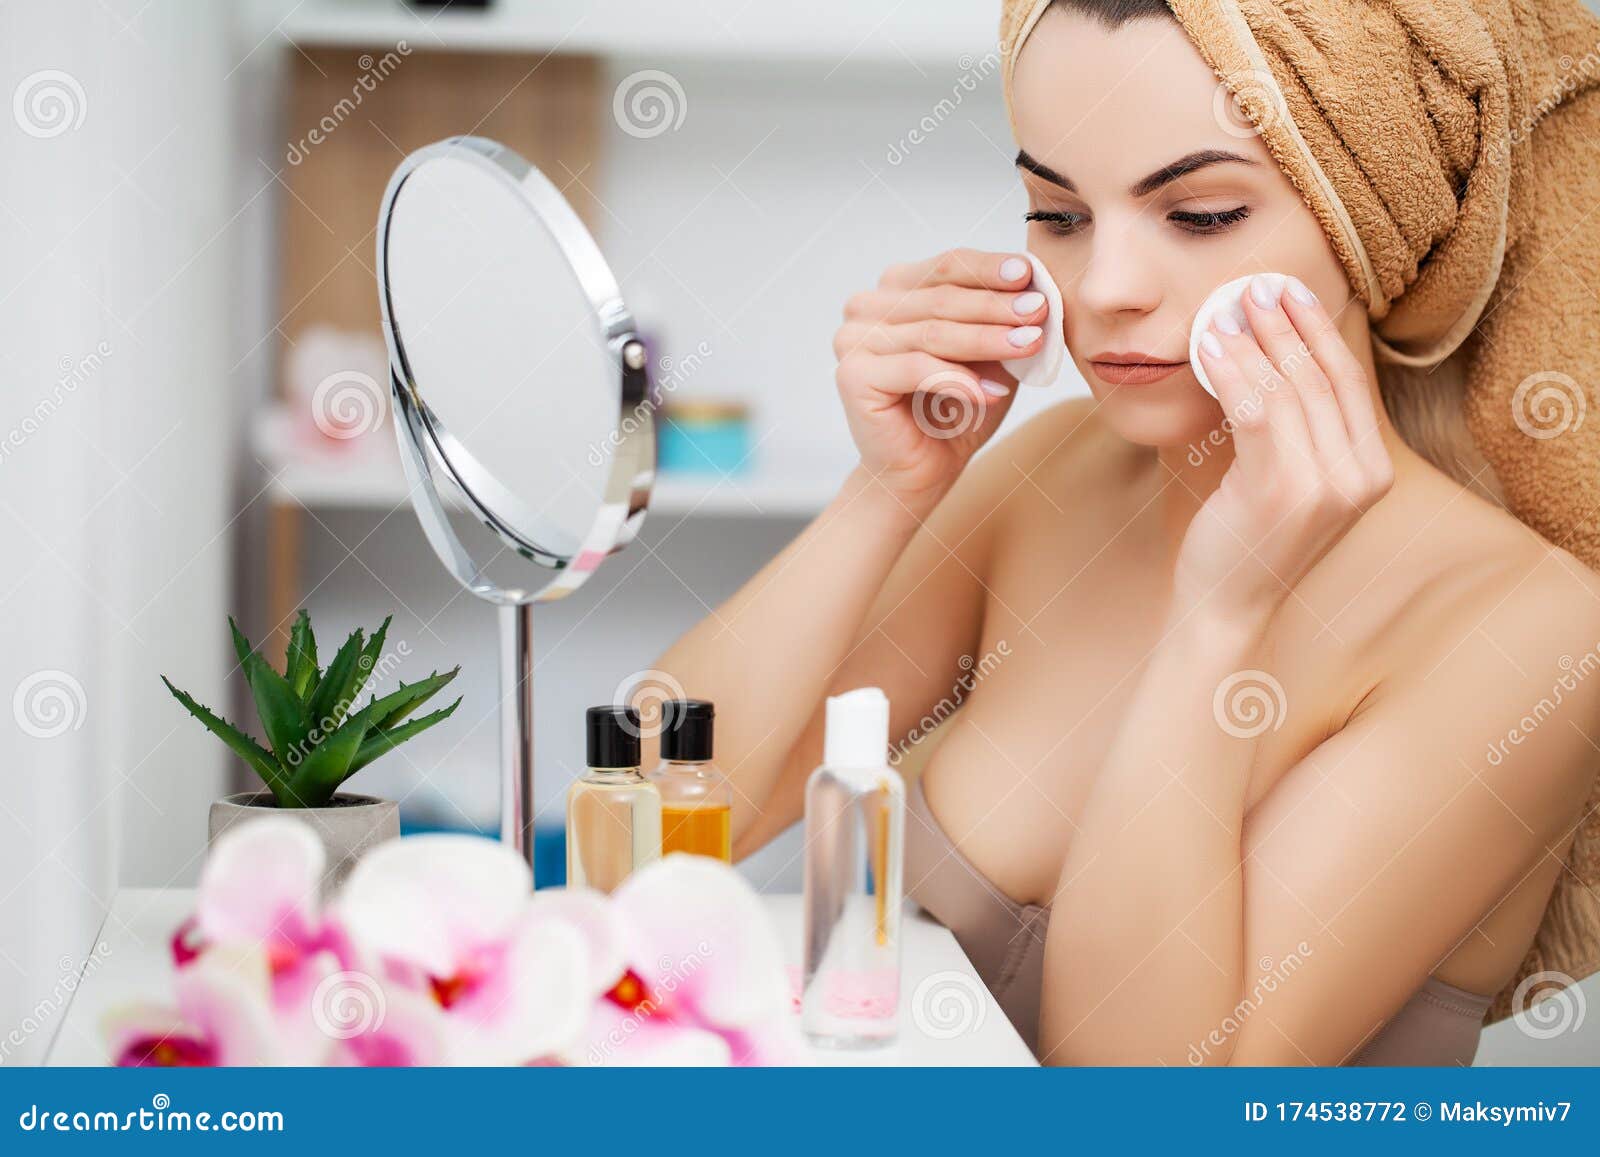 woman getting ready for work over bathroom sink